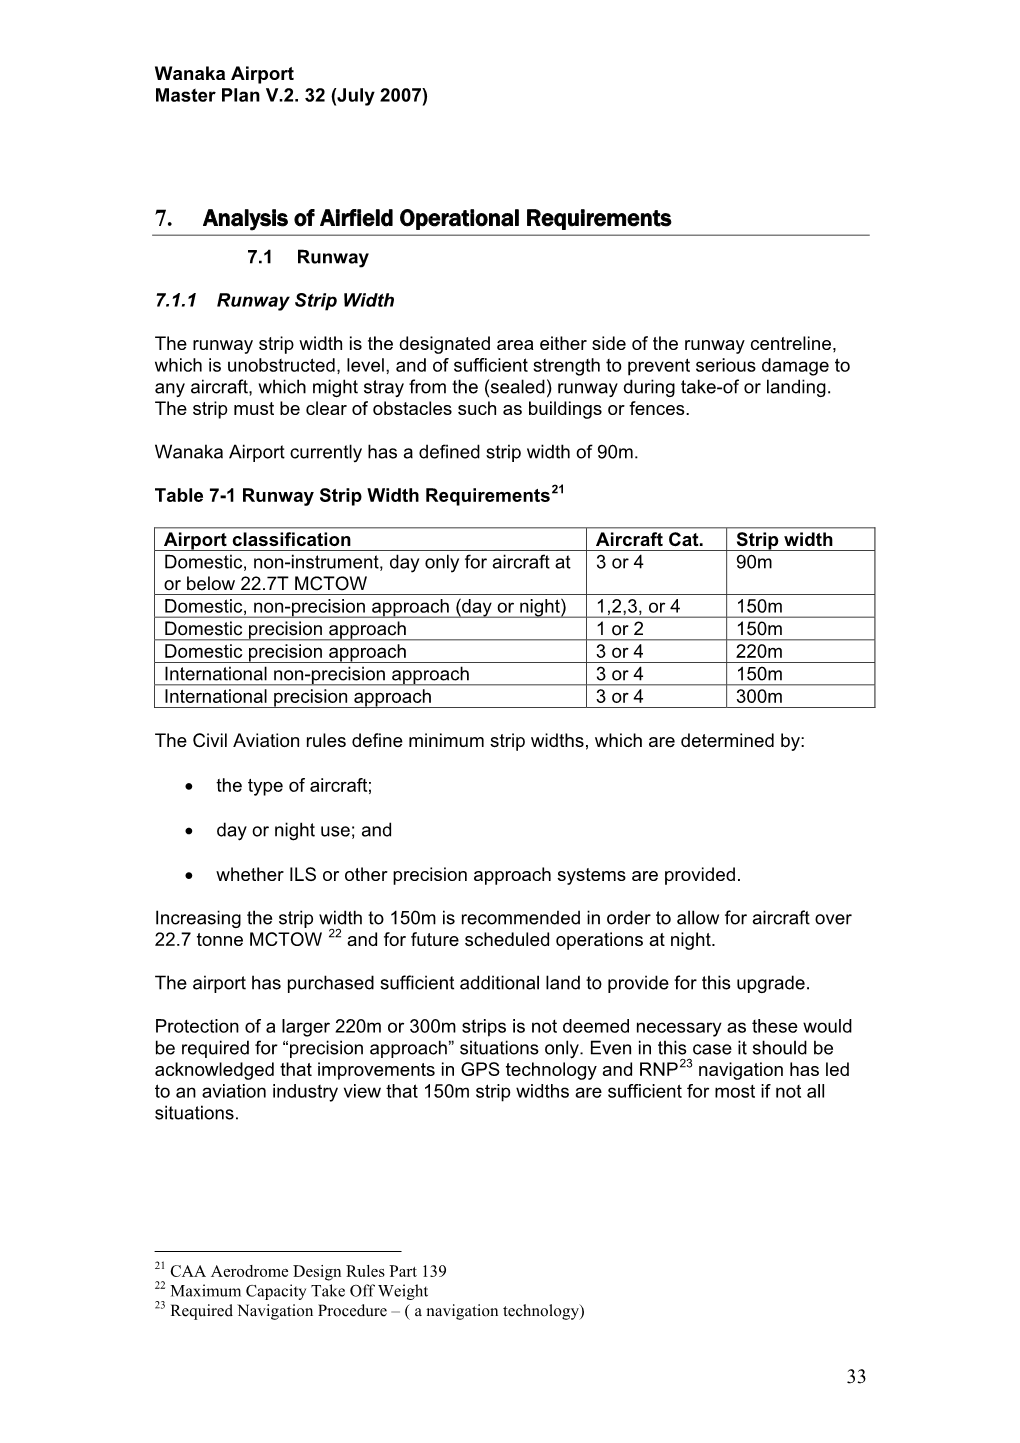 7. Analysis of Airfield Operational Requirements 7.1 Runway